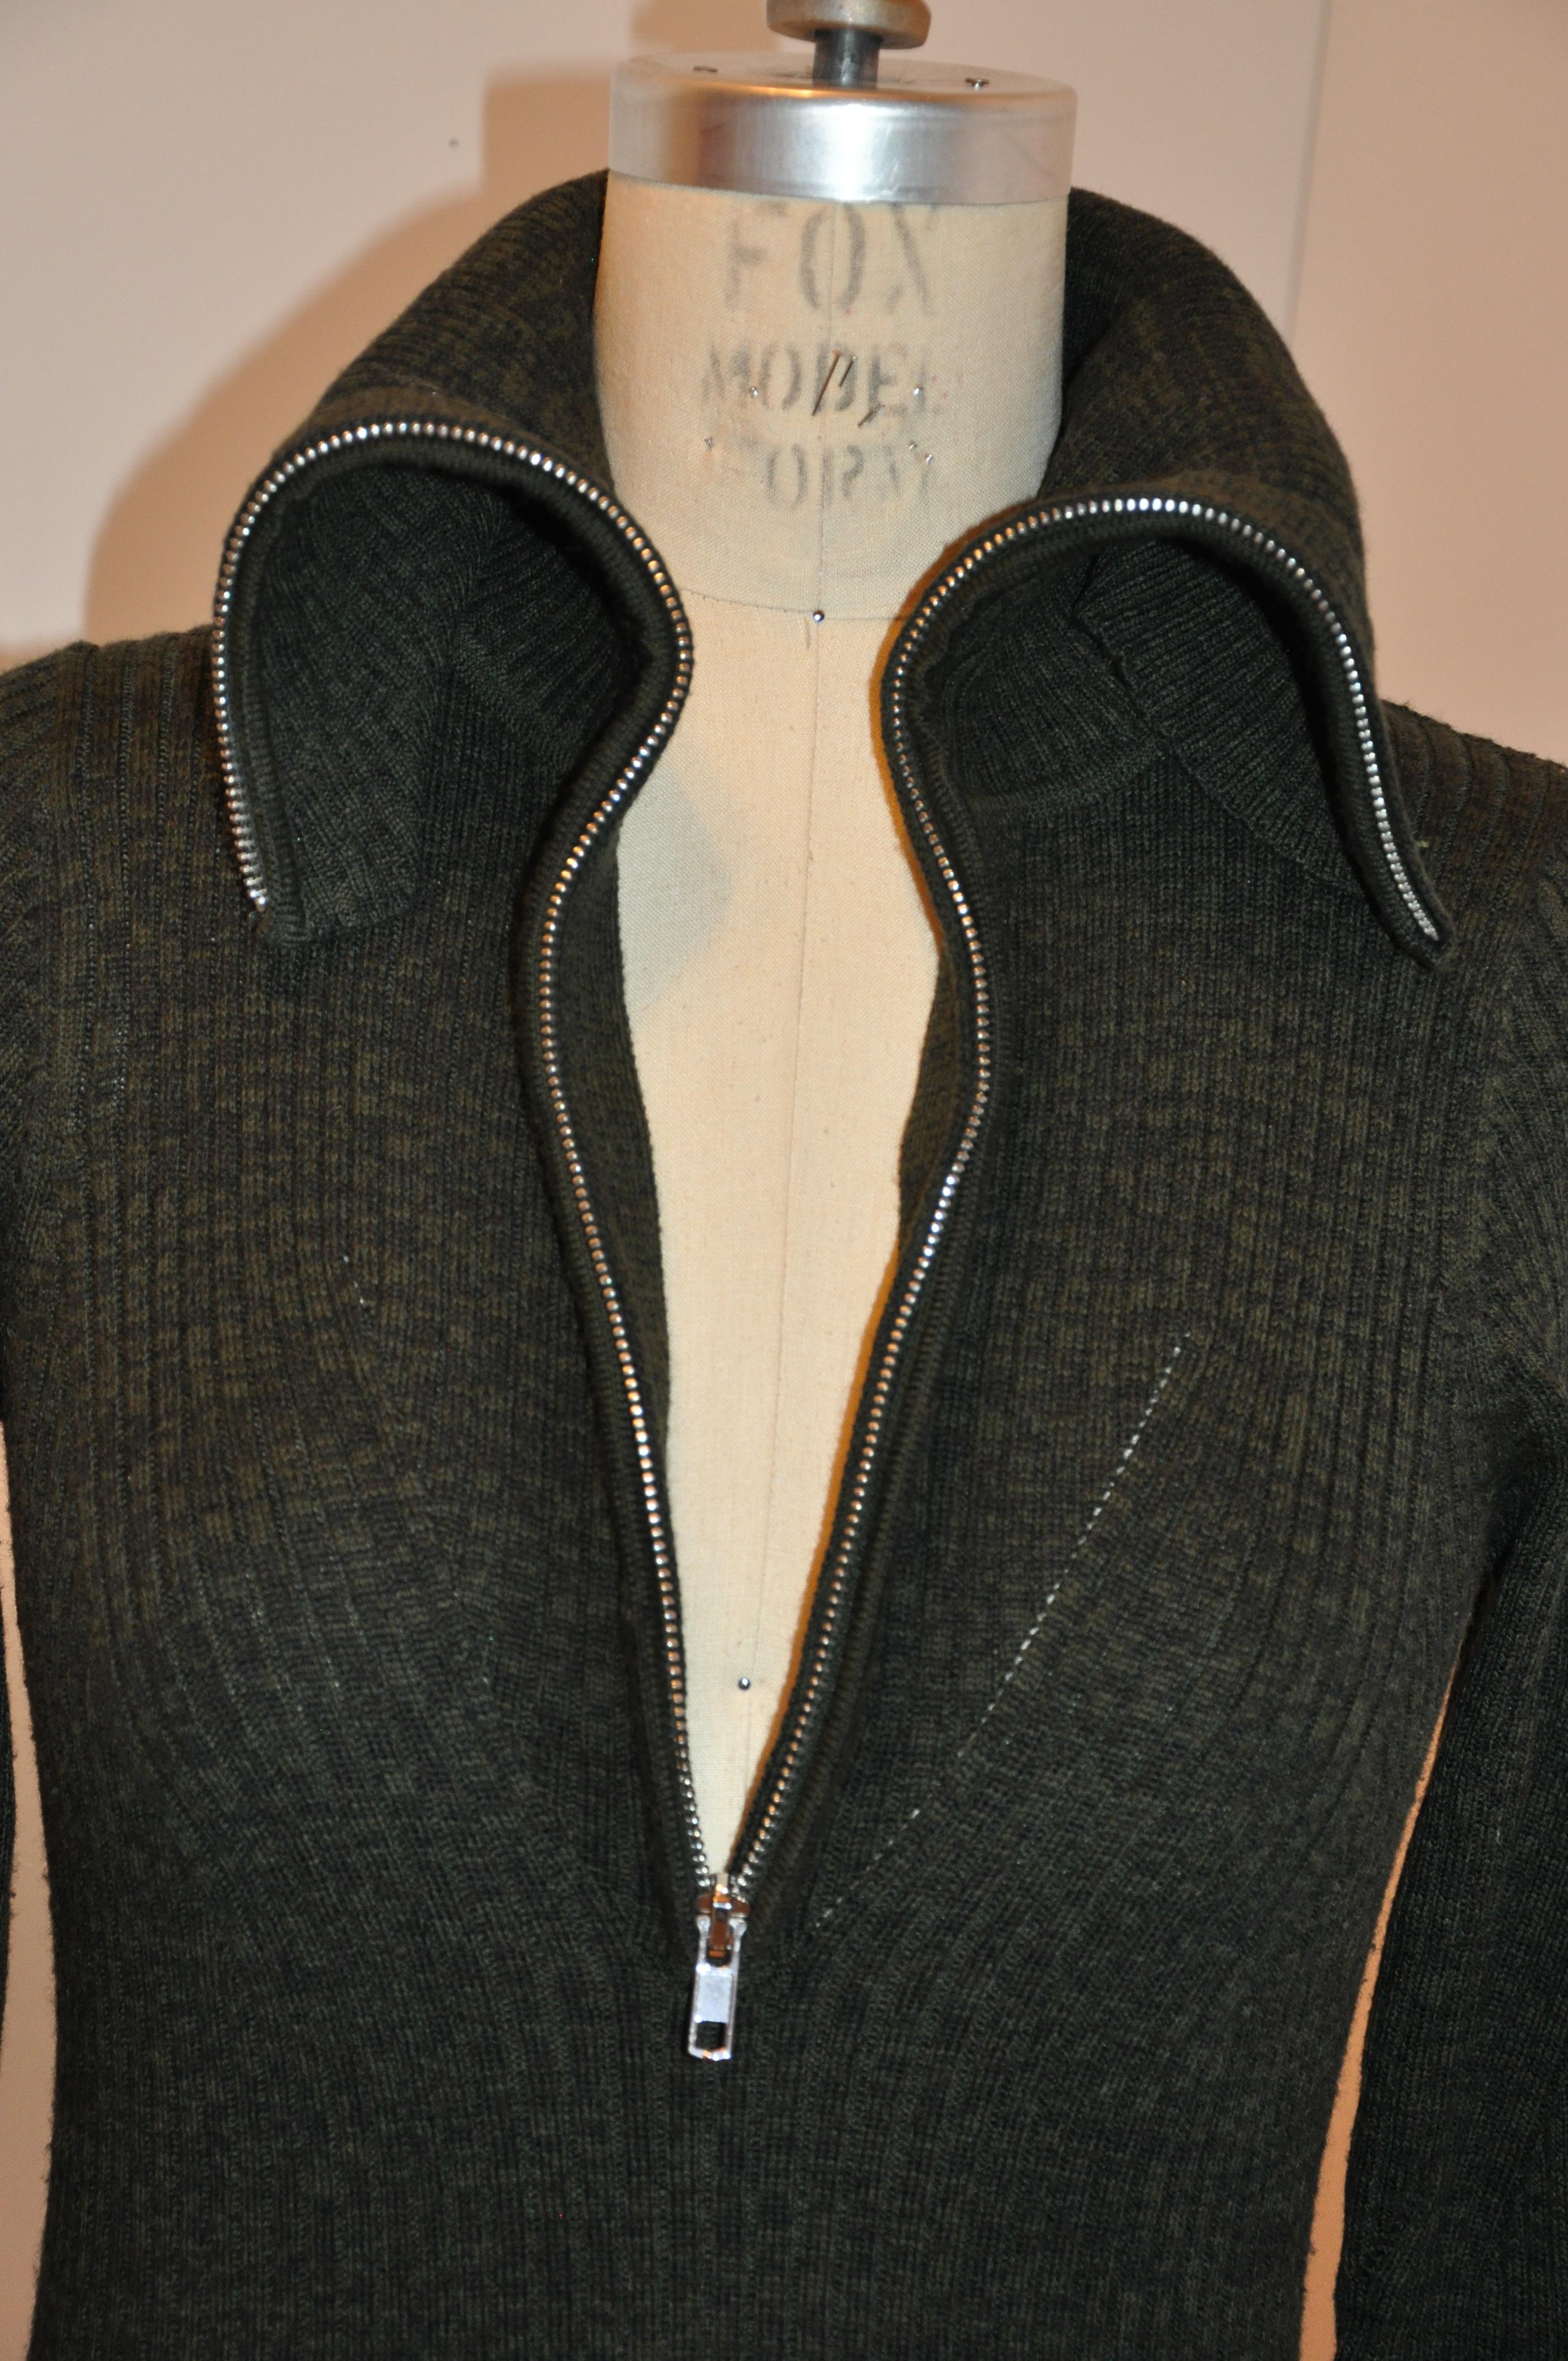 Sandro Dark Forest-Green Extreme High-Collar Body-Hugging Zippered Kitted Top In Good Condition For Sale In New York, NY